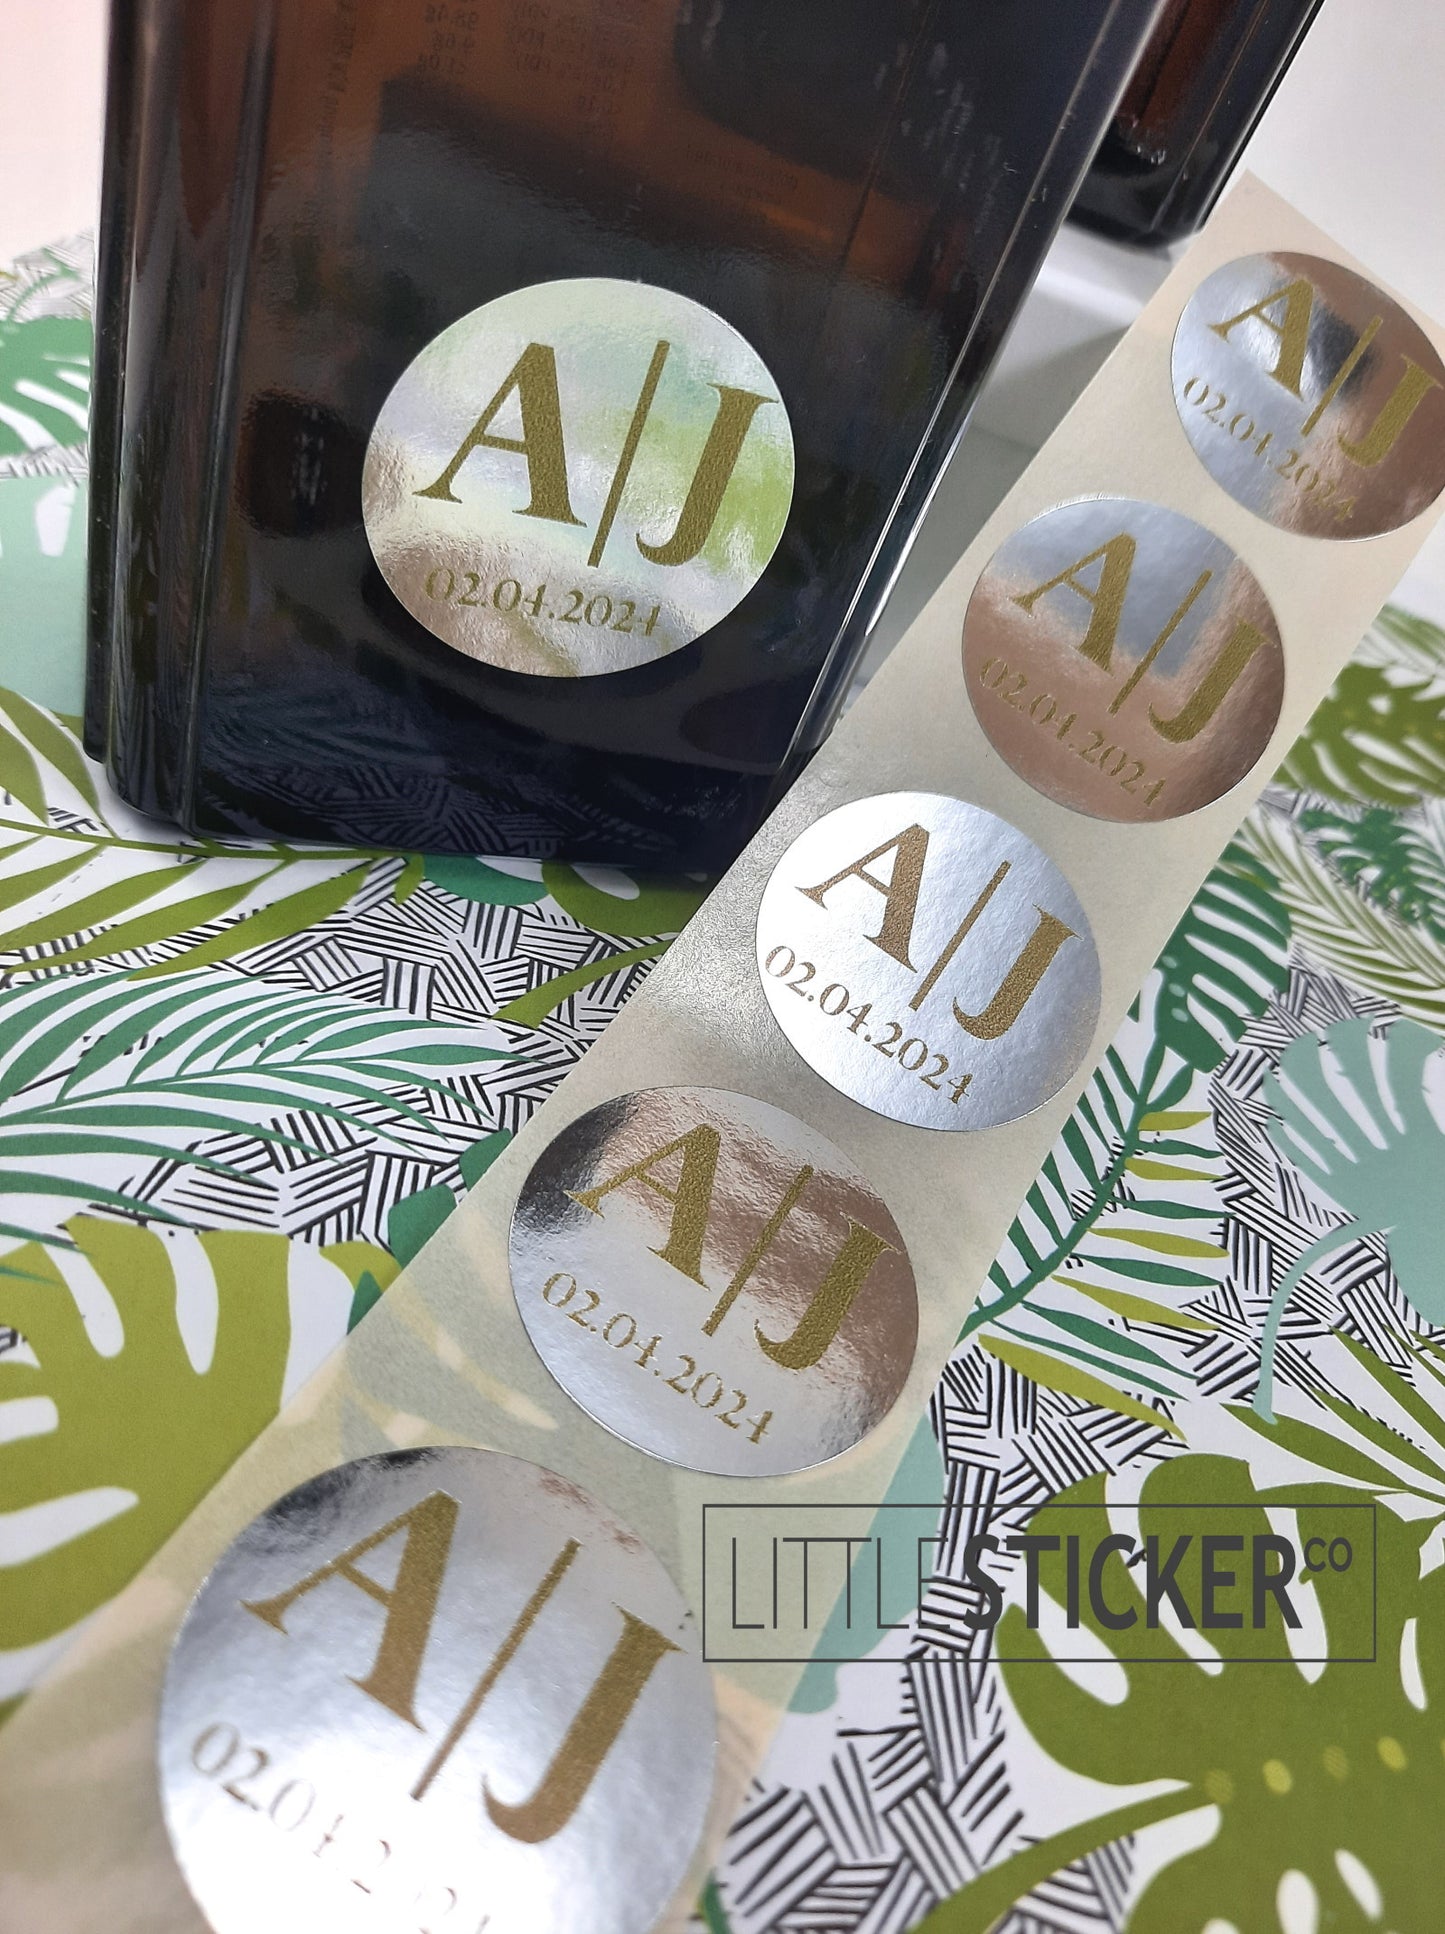 Wedding stickers - simple yet formal design. Personalise with your initials & date.  Choose your sticker shape and colour!